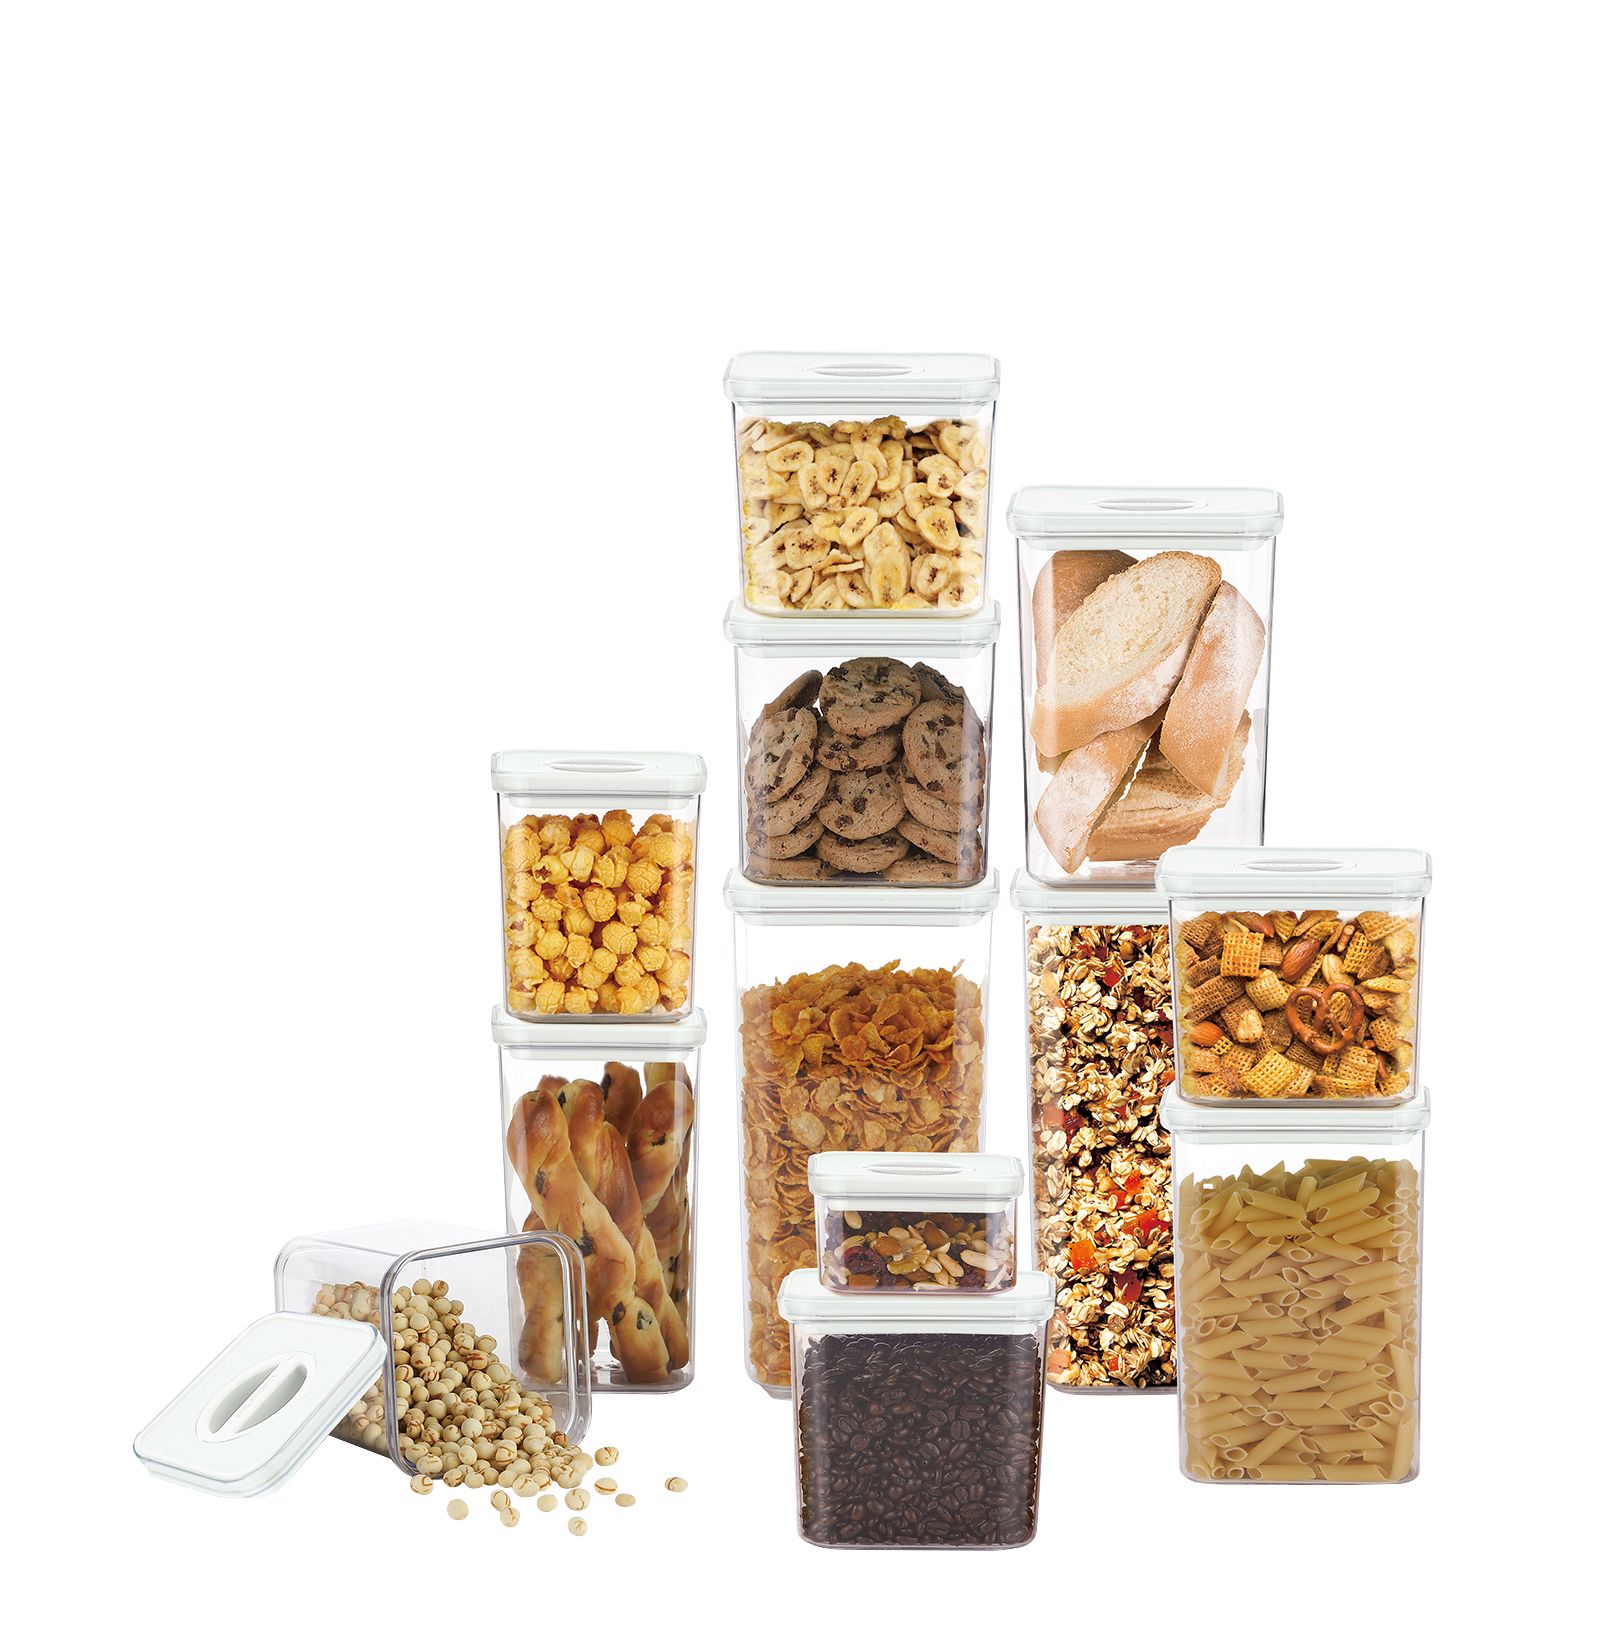 Cabinet Hanging Container Airtight Food Storage Containers with